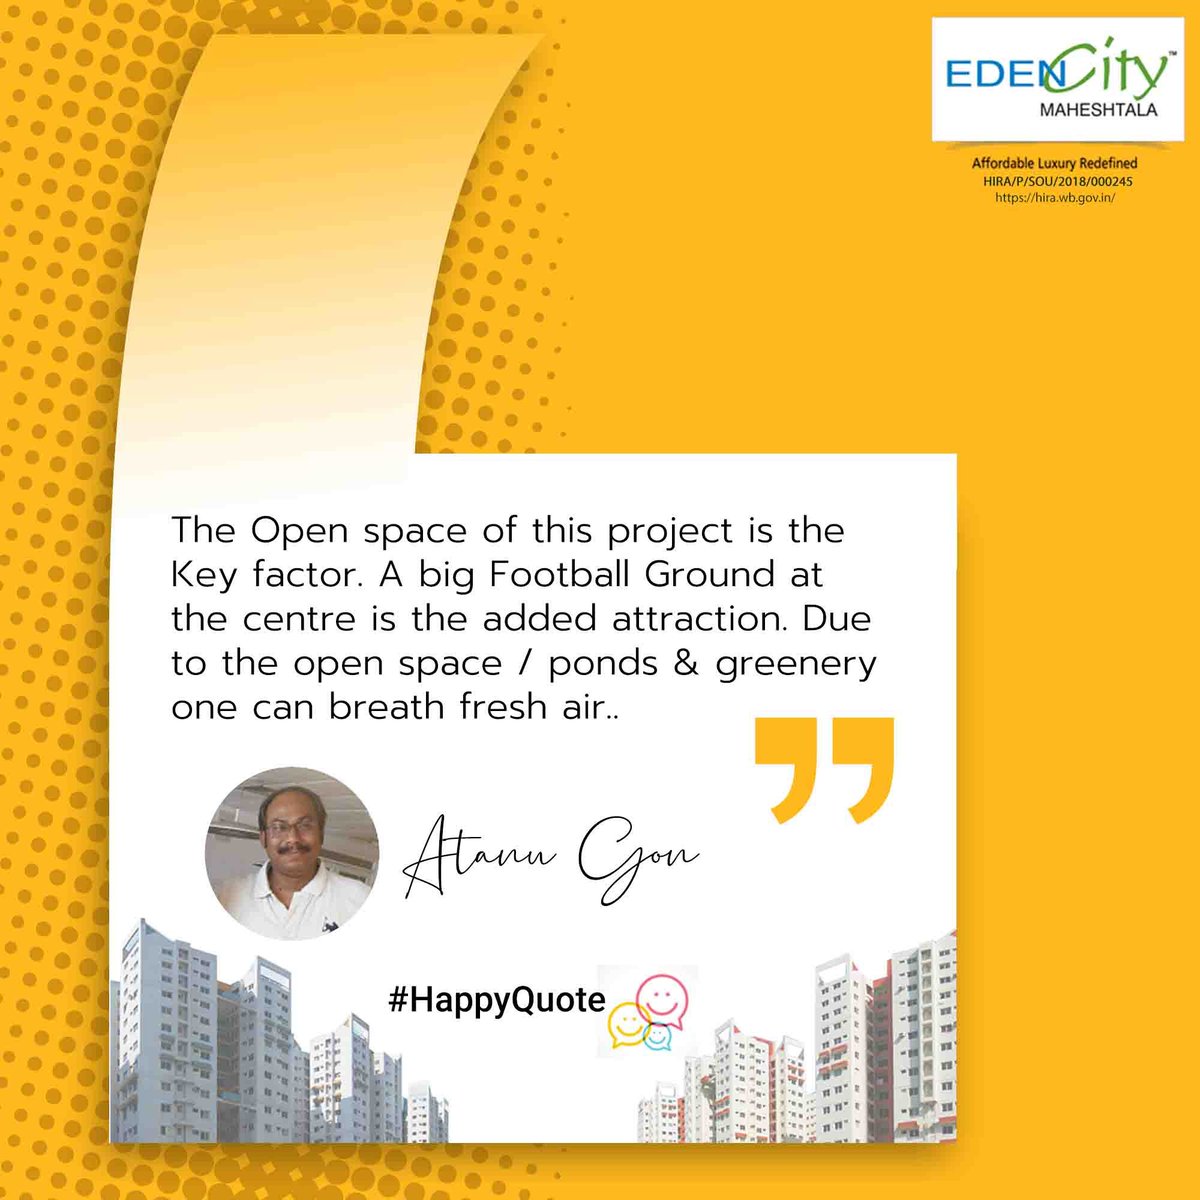 Our residents at Eden City Maheshtala have spoken, and their words paint a picture of the exceptional living experience we offer. 

Get to know more at edencal.com
#EdenCity #EdenCityMaheshtala #KolkataApartments